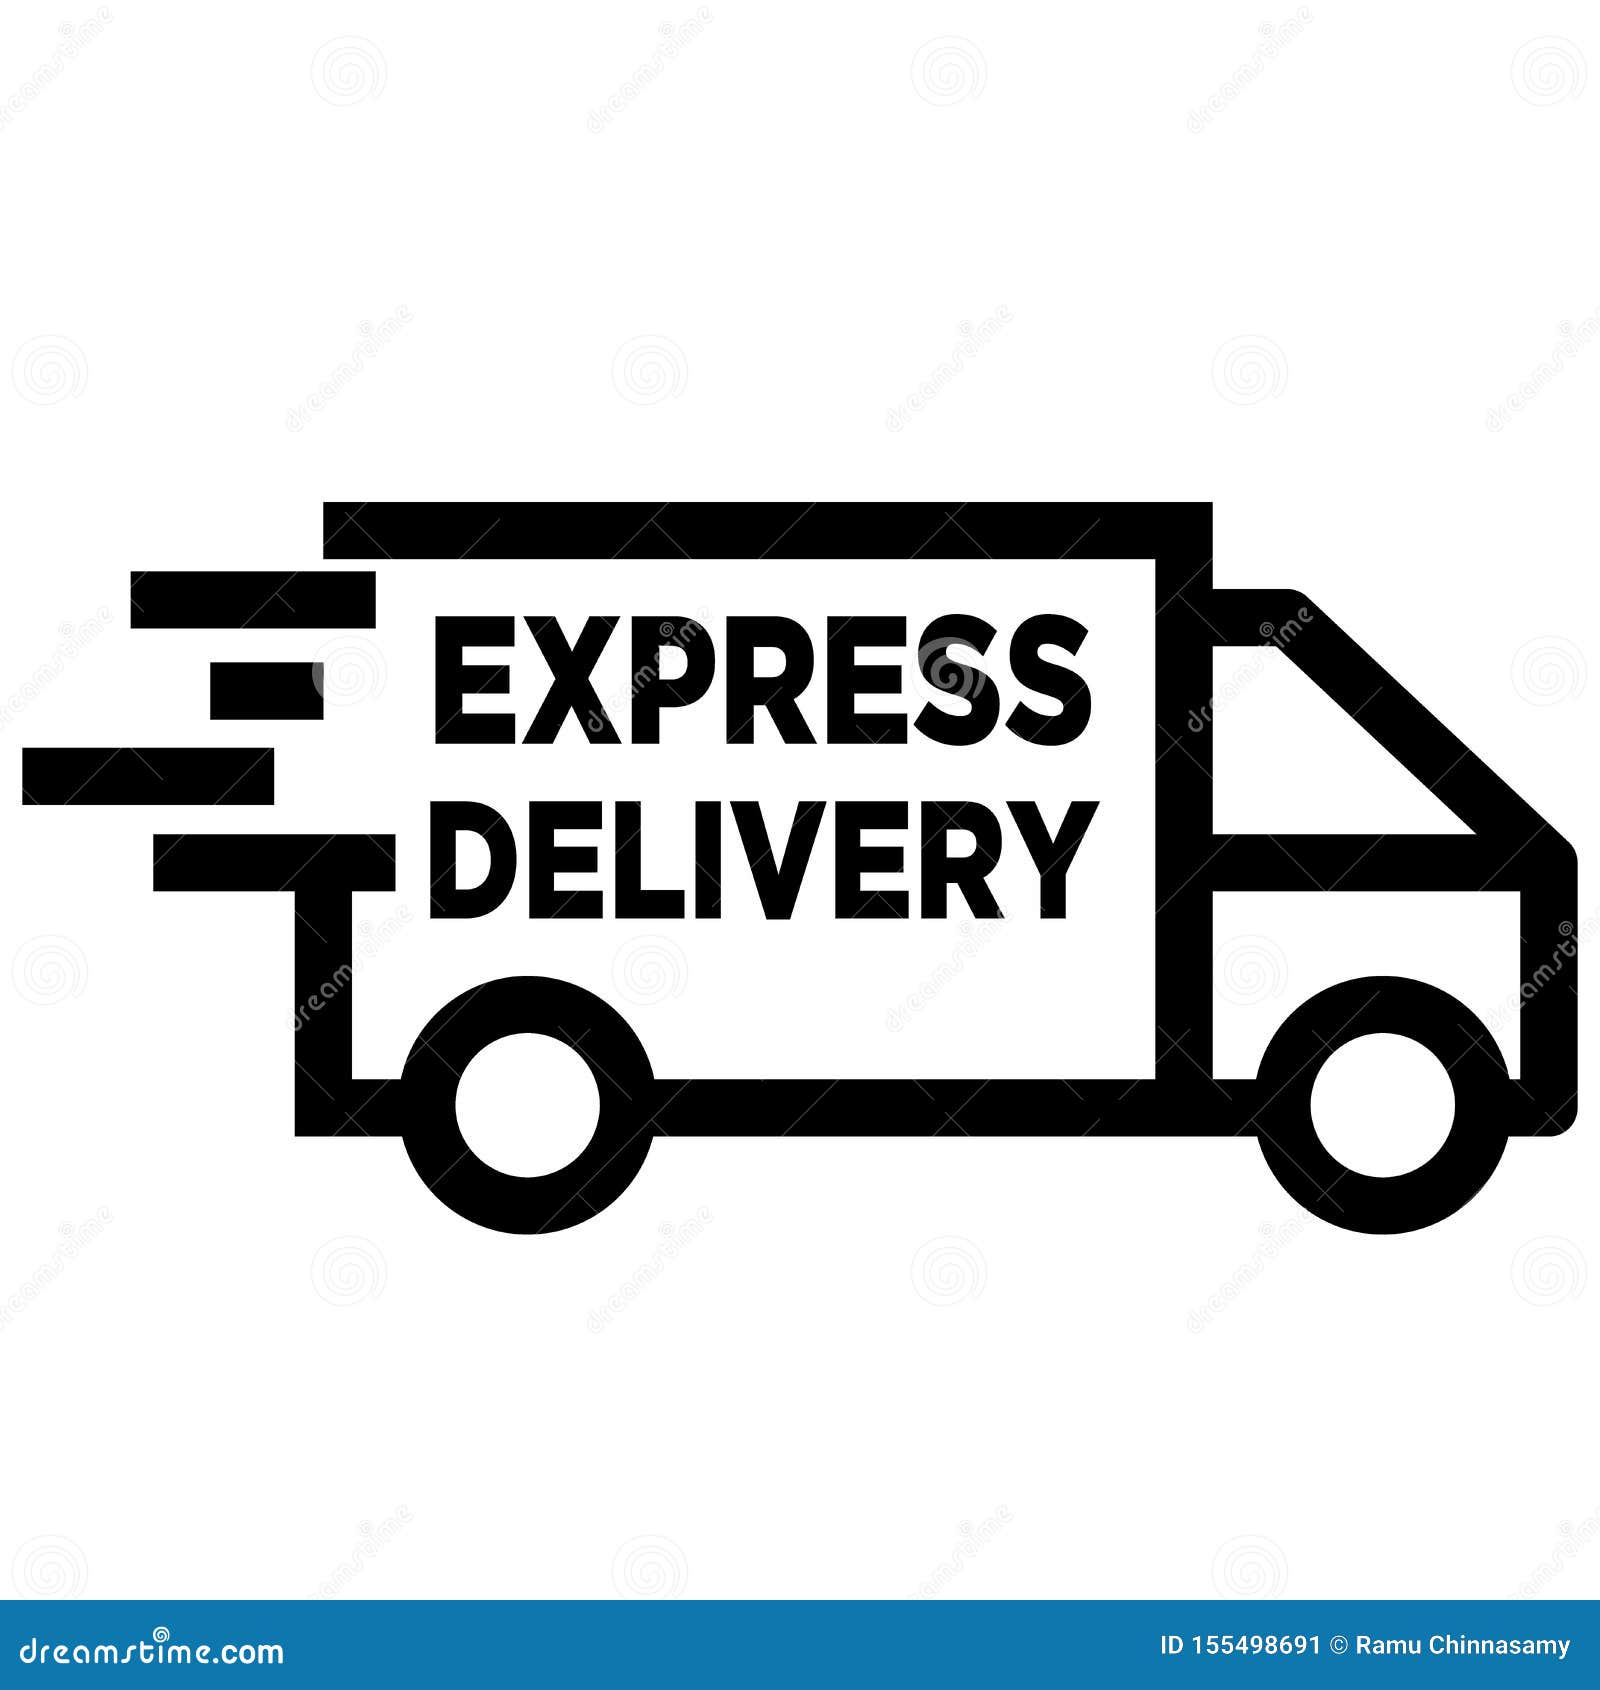 https://thumbs.dreamstime.com/z/free-delivery-express-155498691.jpg